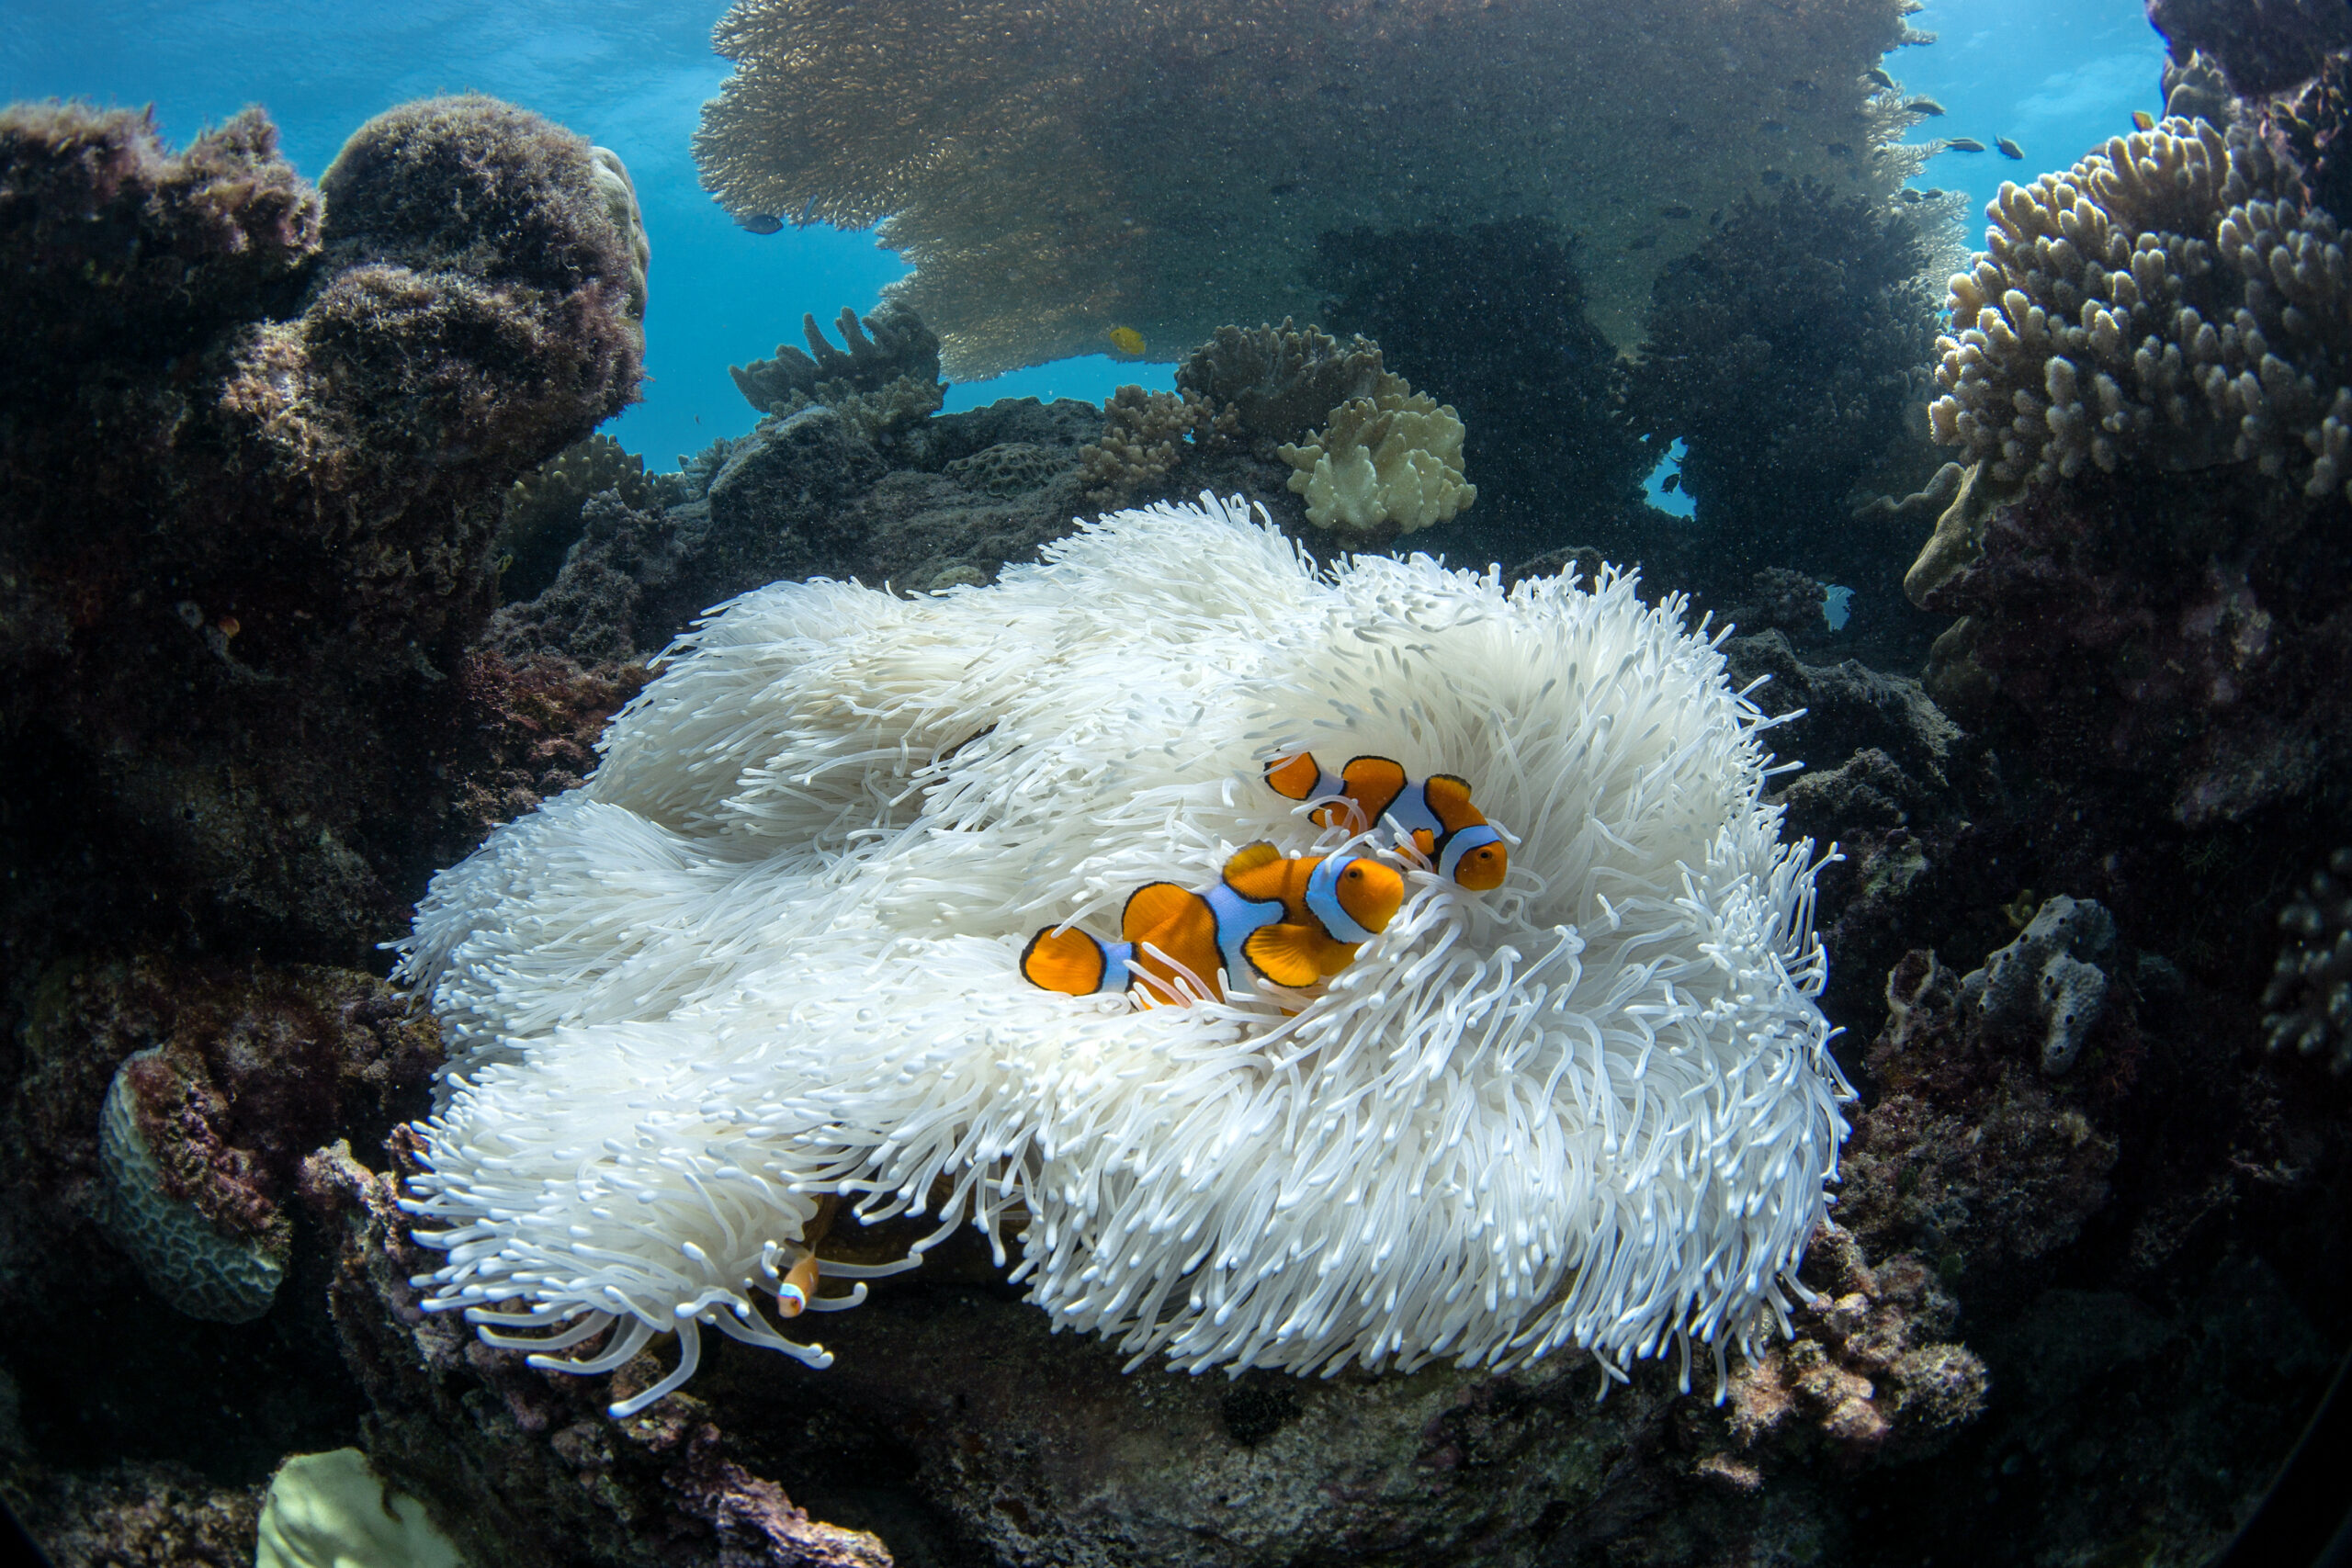 Two anemone fish are in a bleached anemone